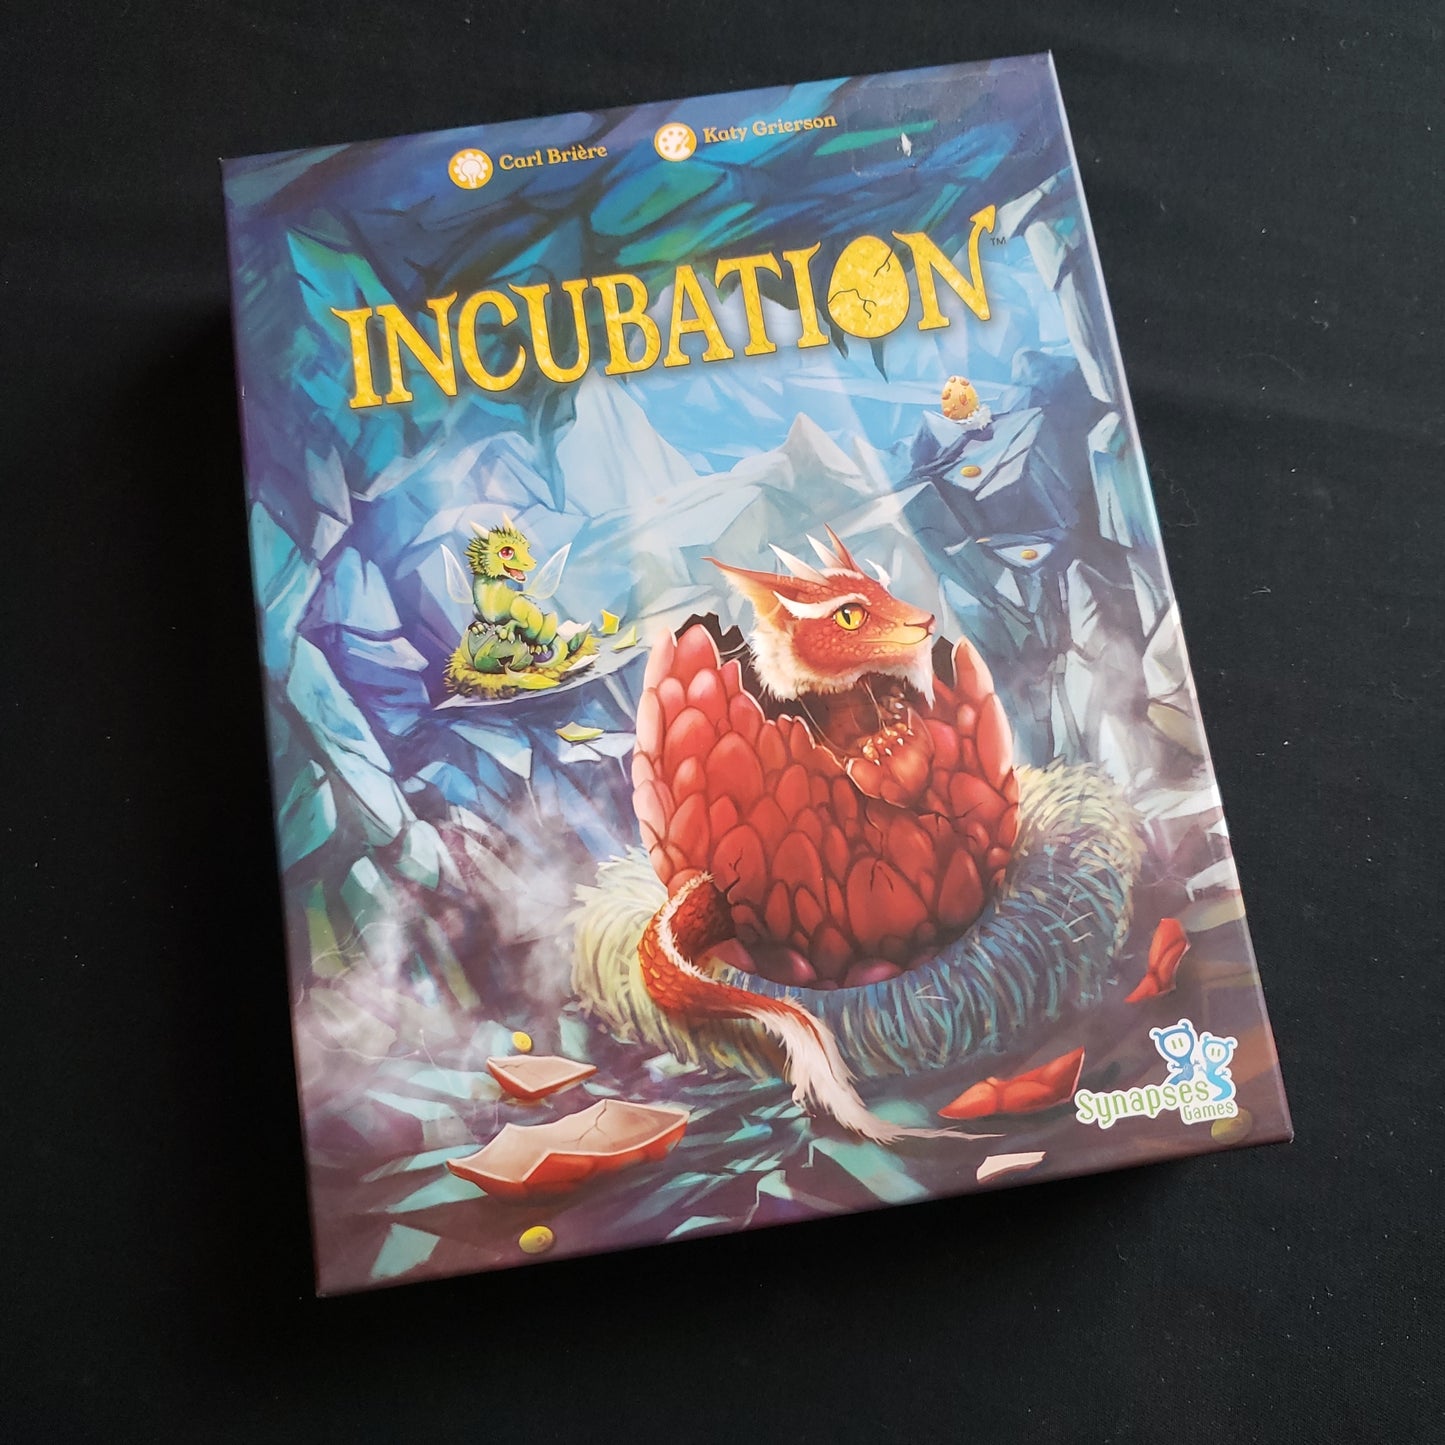 Image shows the front cover of the box of the Incubation board game